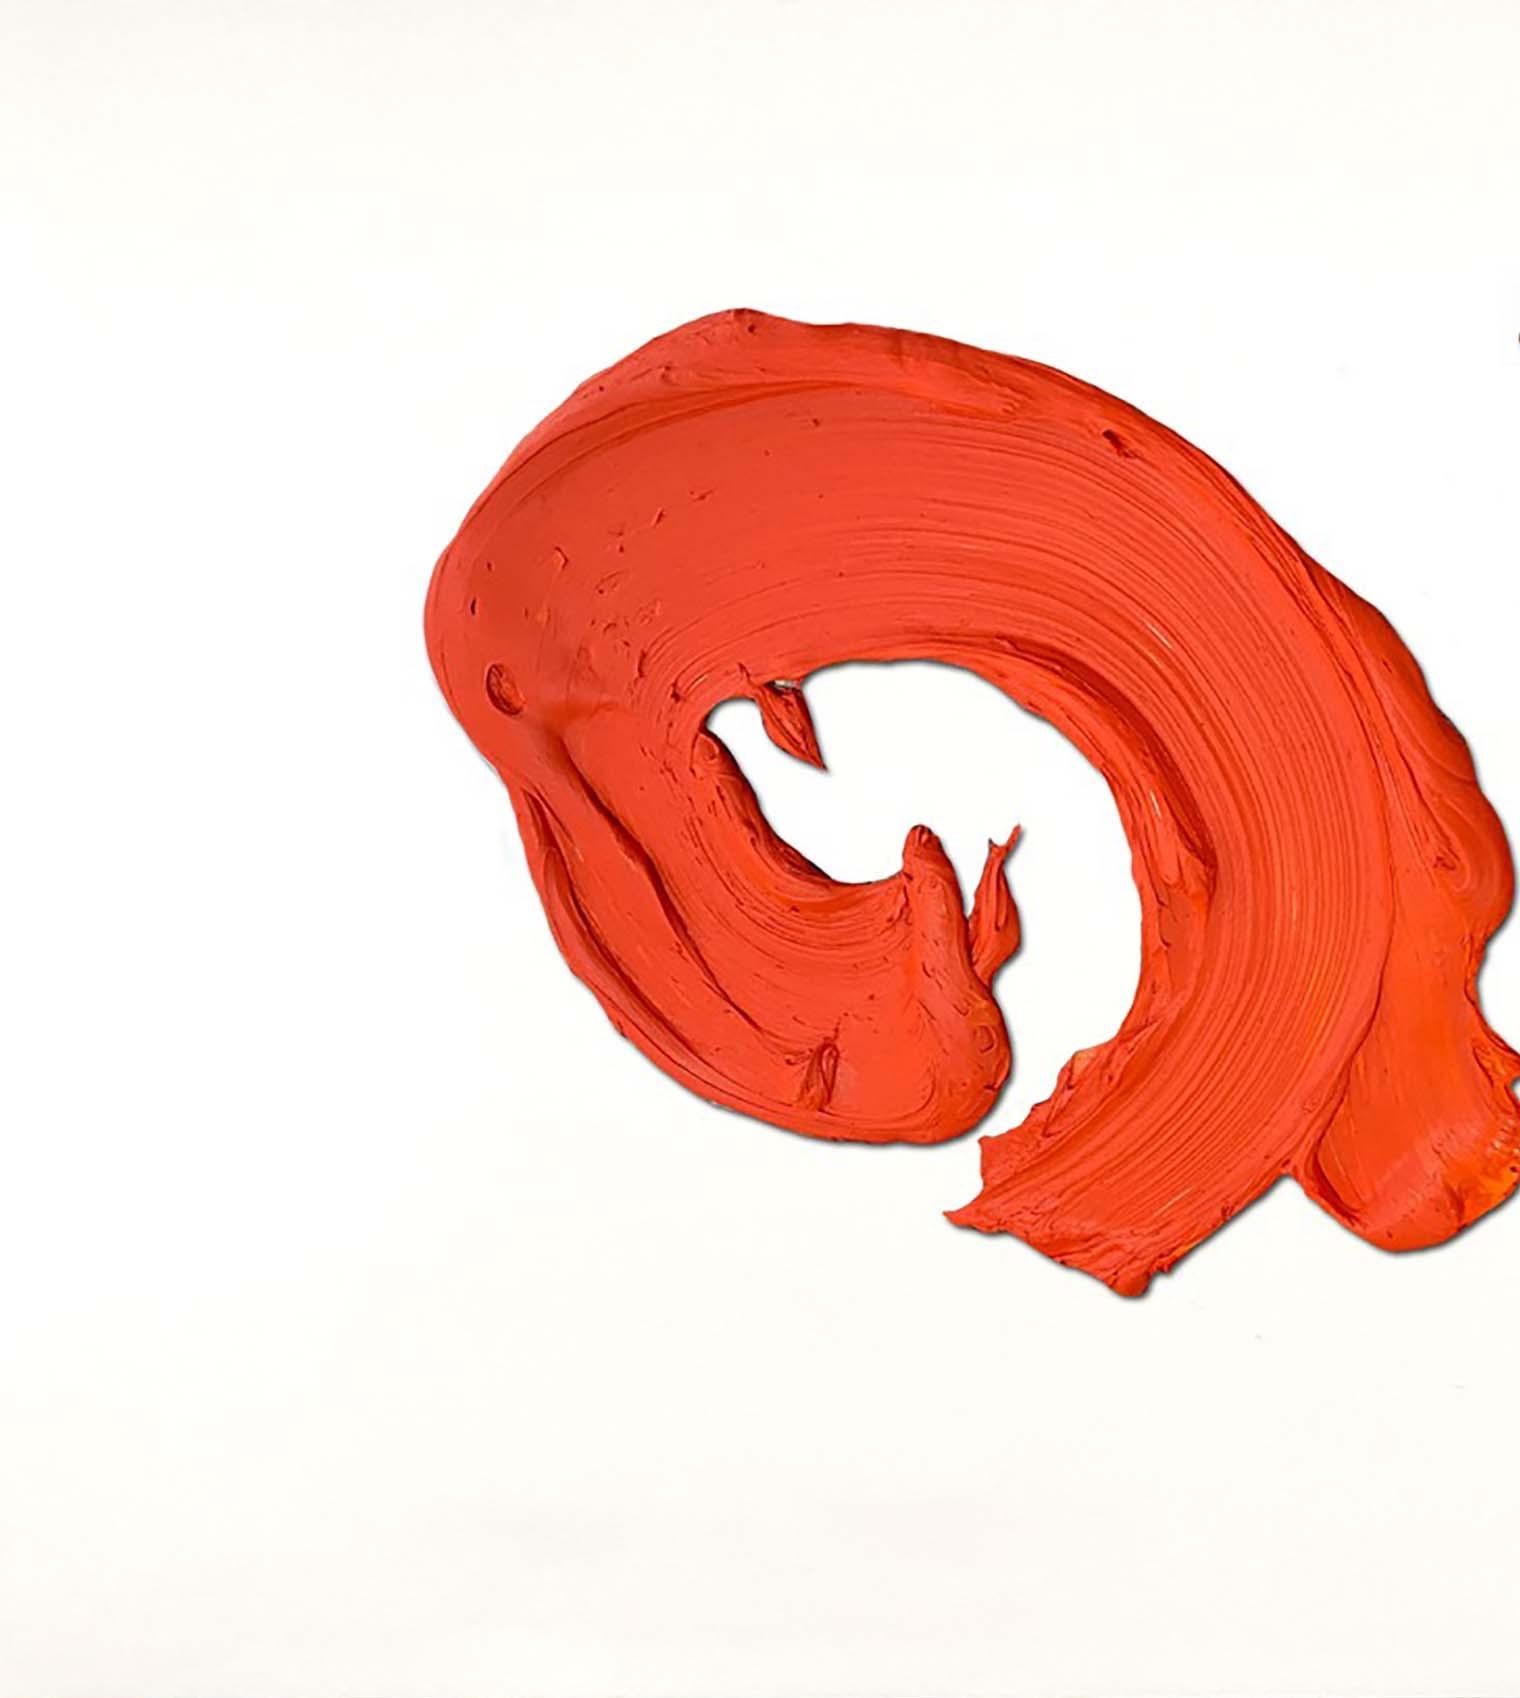 Zbo - Painting by Donald Martiny